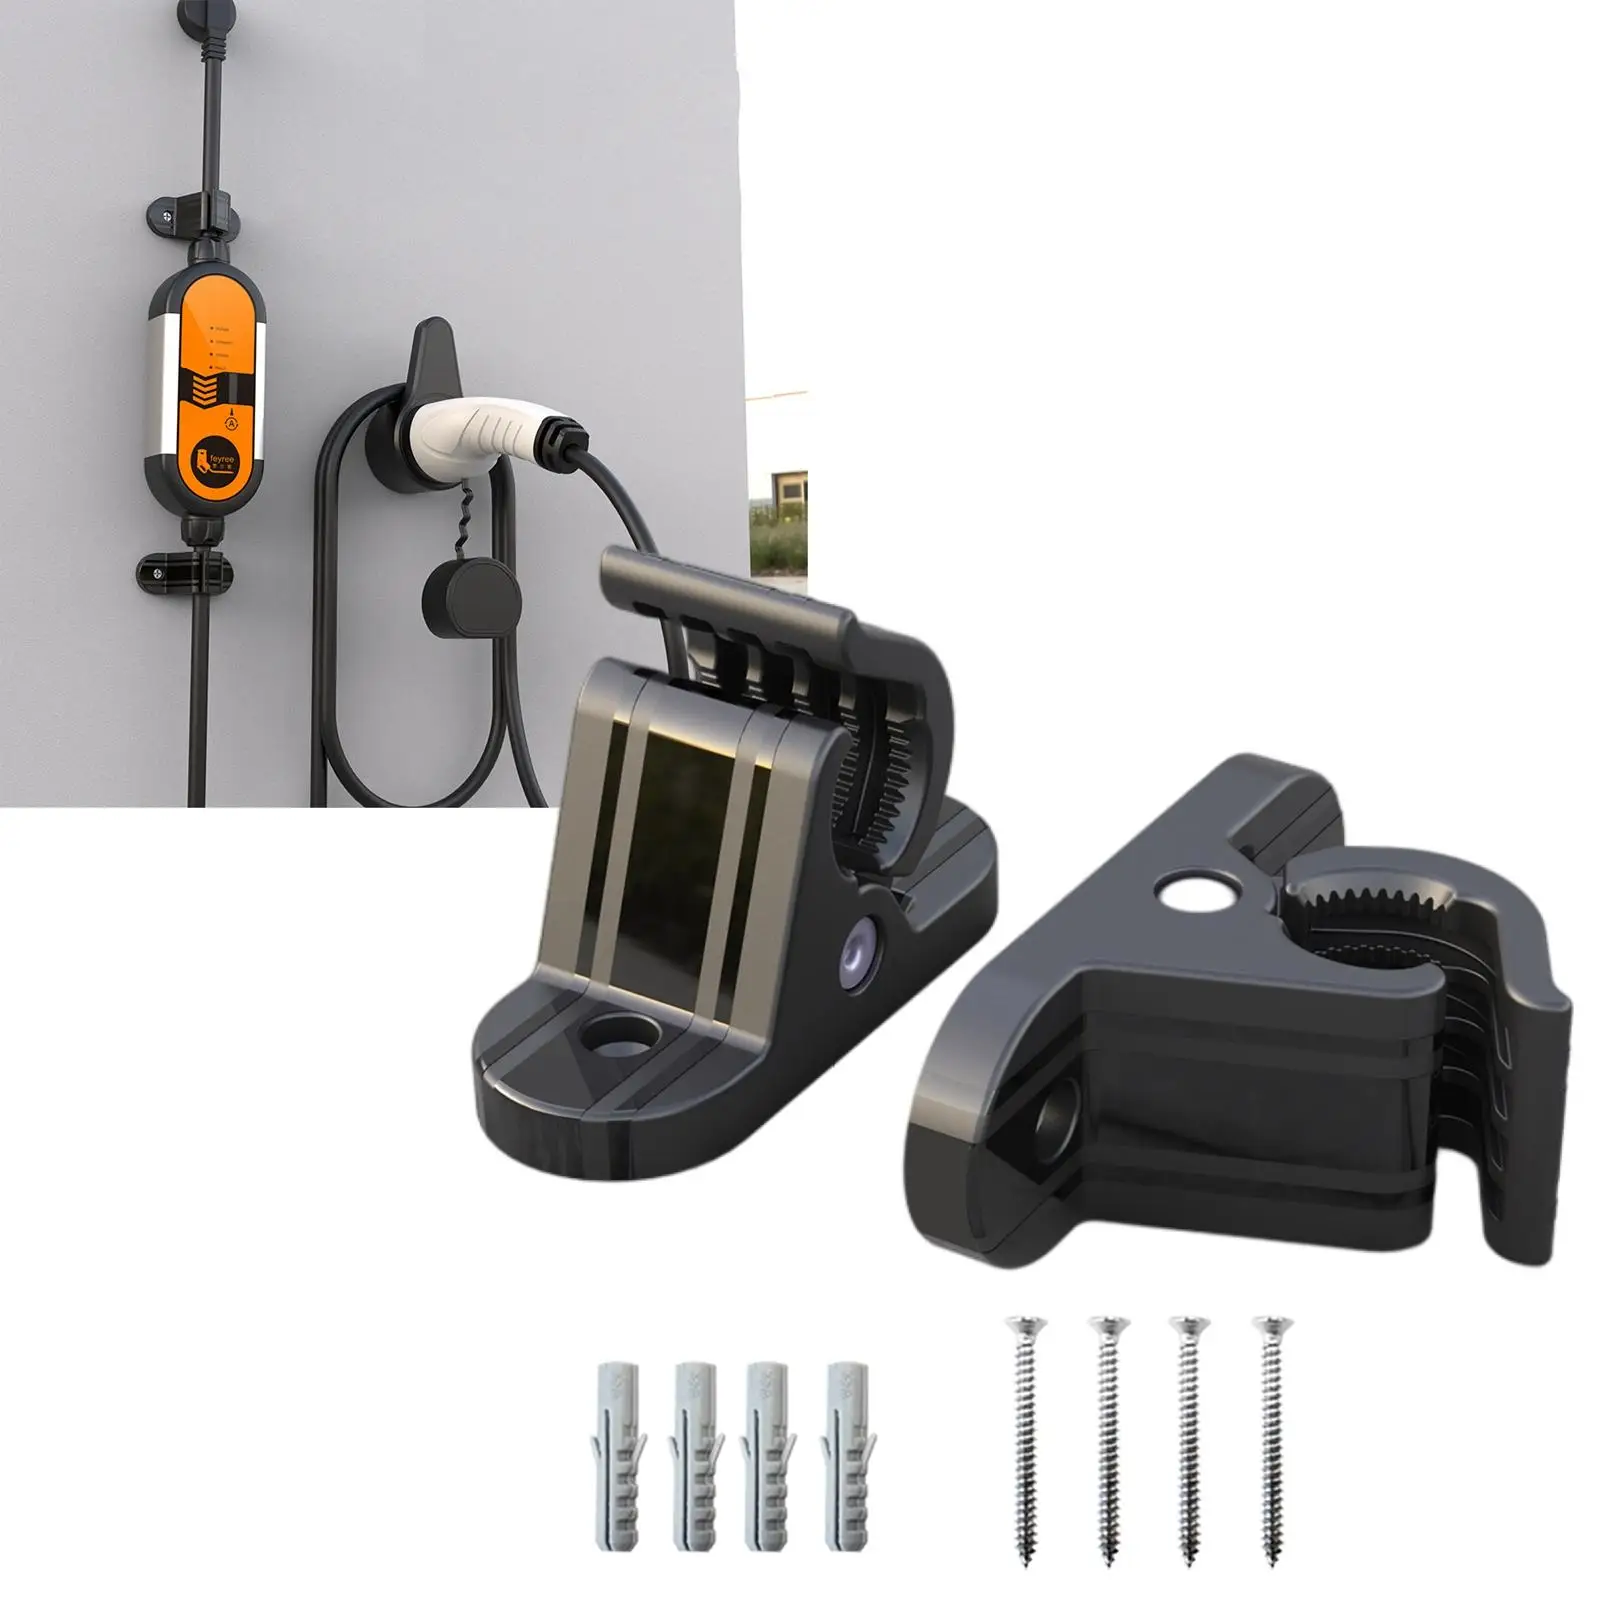 Charger Holder Wall-Mounted Portable Bracket Clamp for Electric Vehicle EV